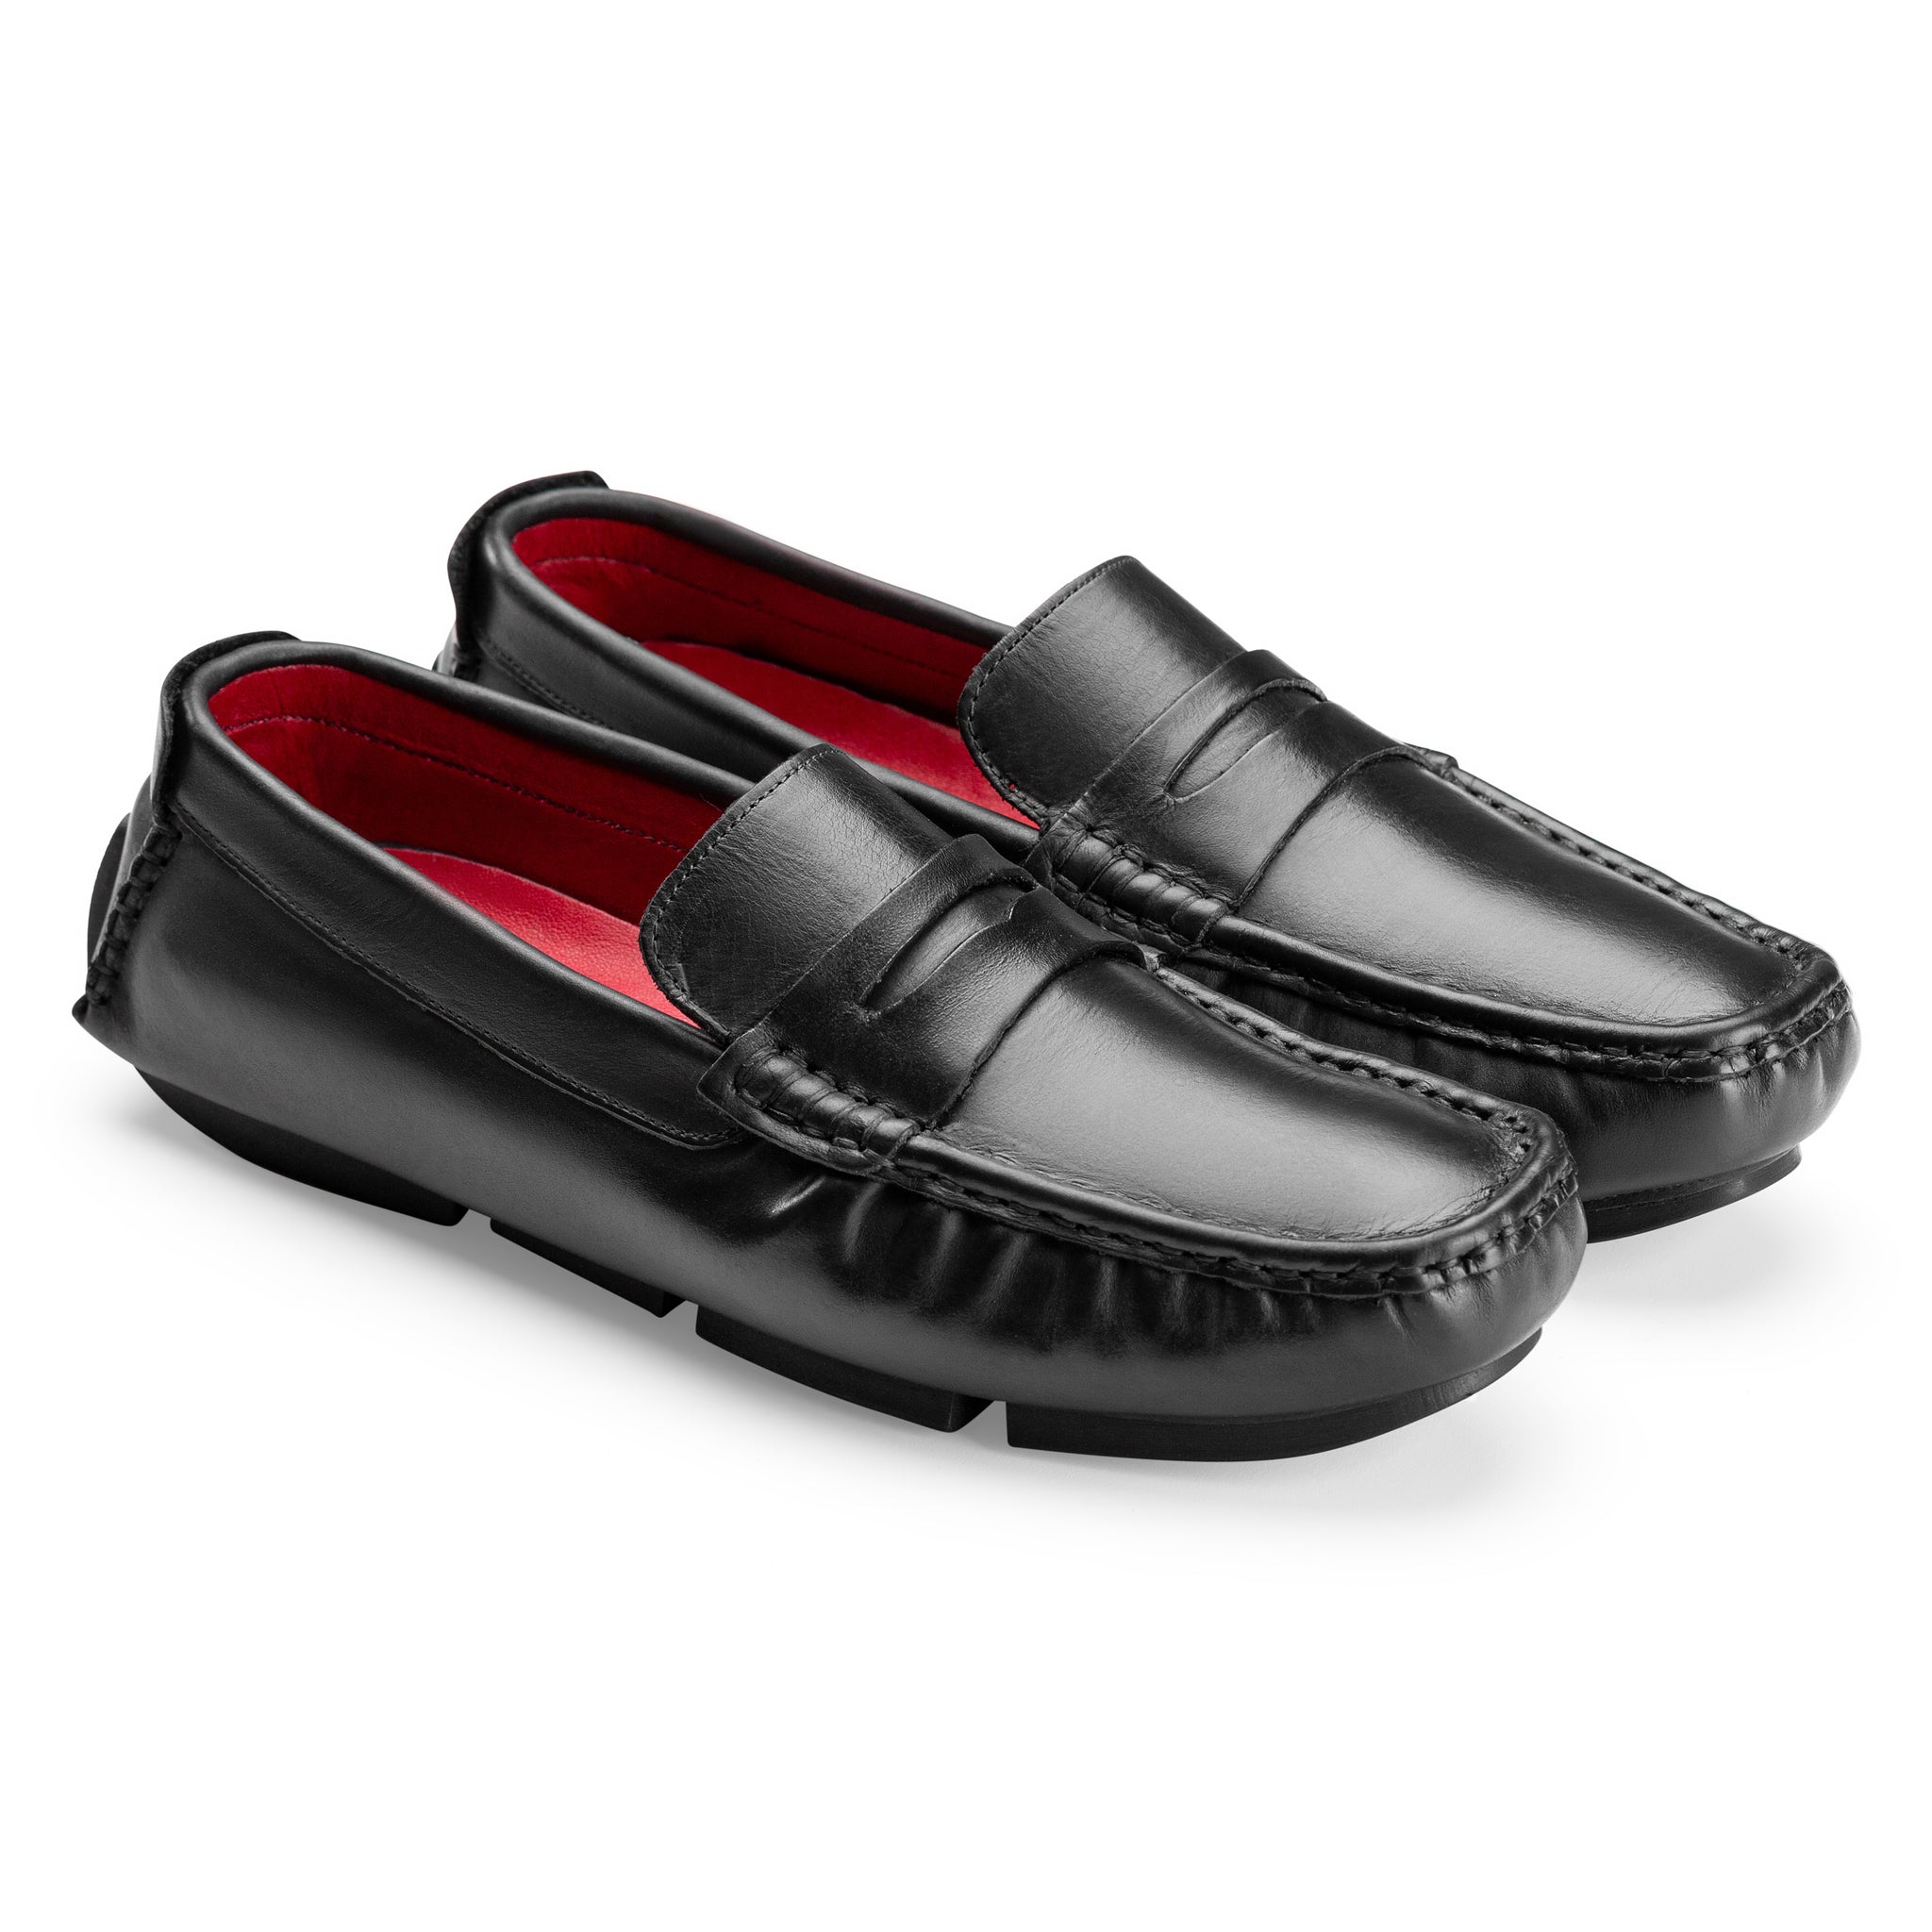 Moccasins | Suede calf leather rubber sole -Black